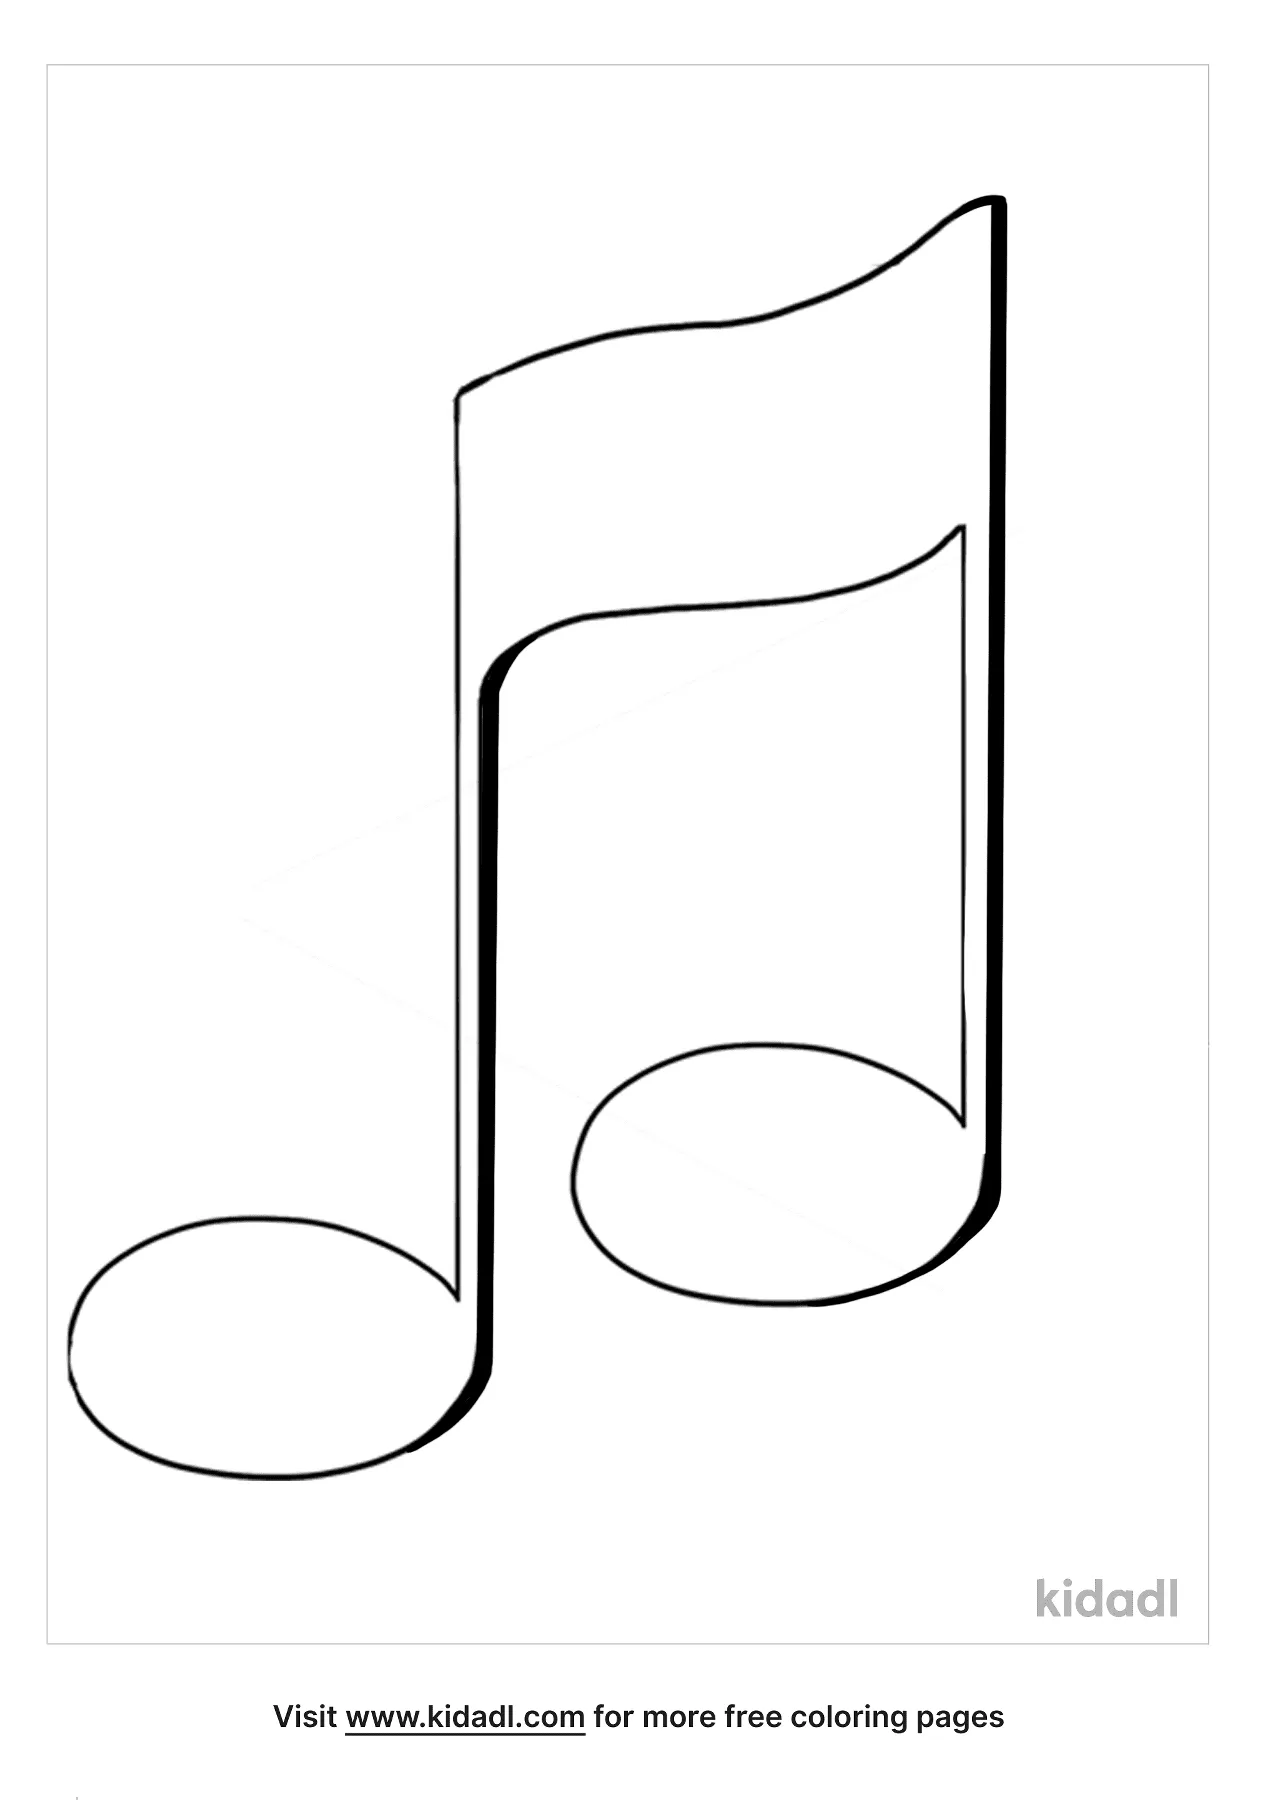 Free music note coloring page coloring page printables